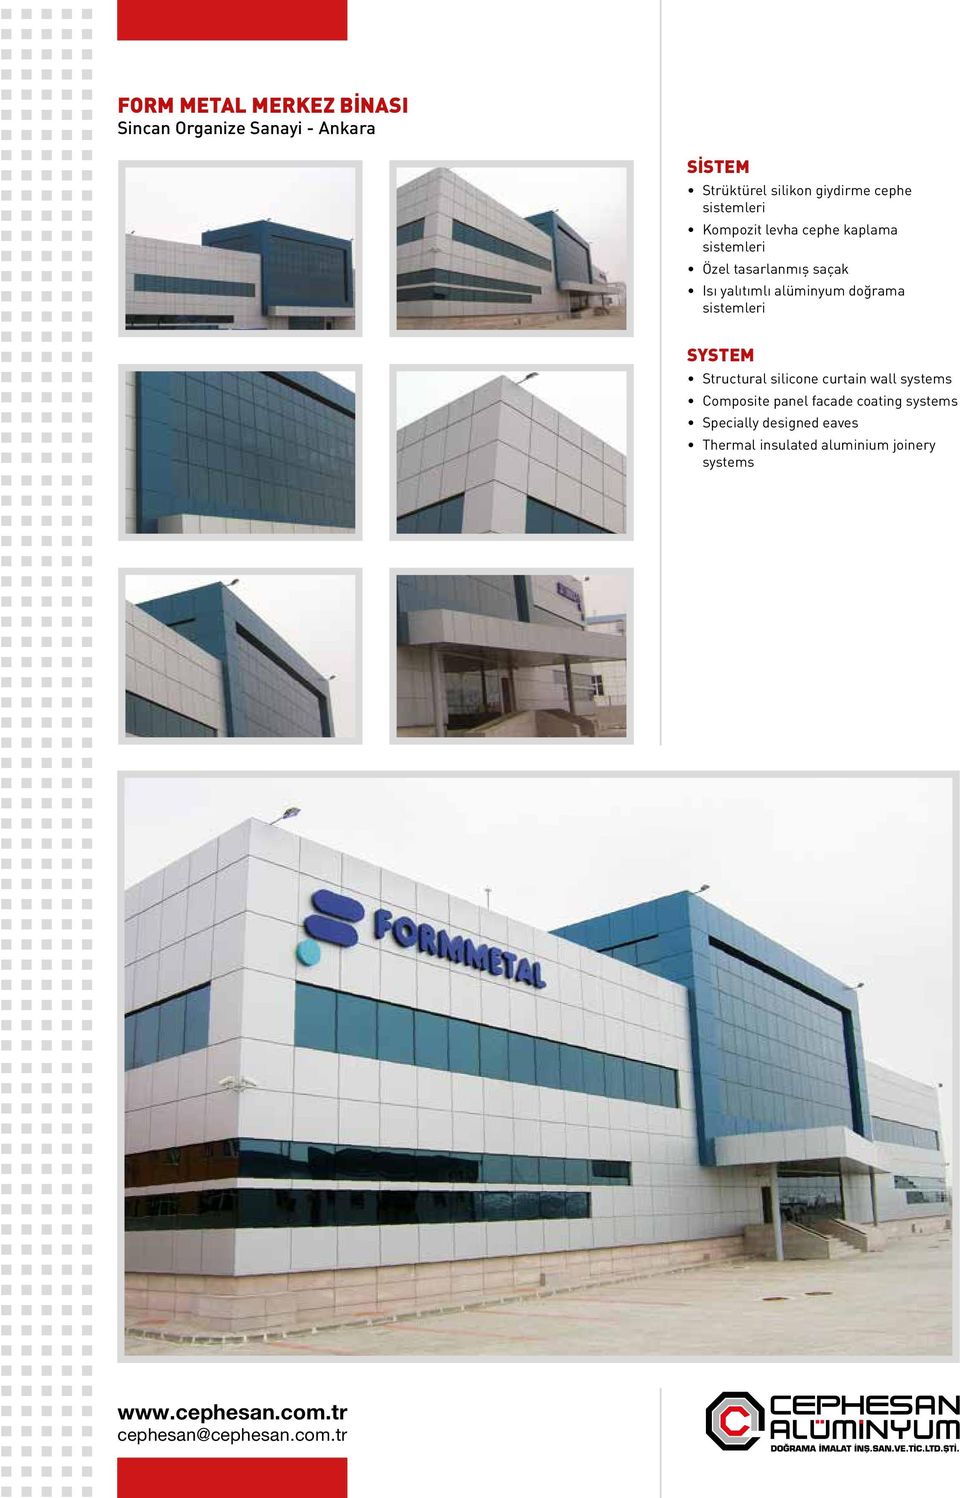 alüminyum doğrama Structural silicone curtain wall systems Composite panel